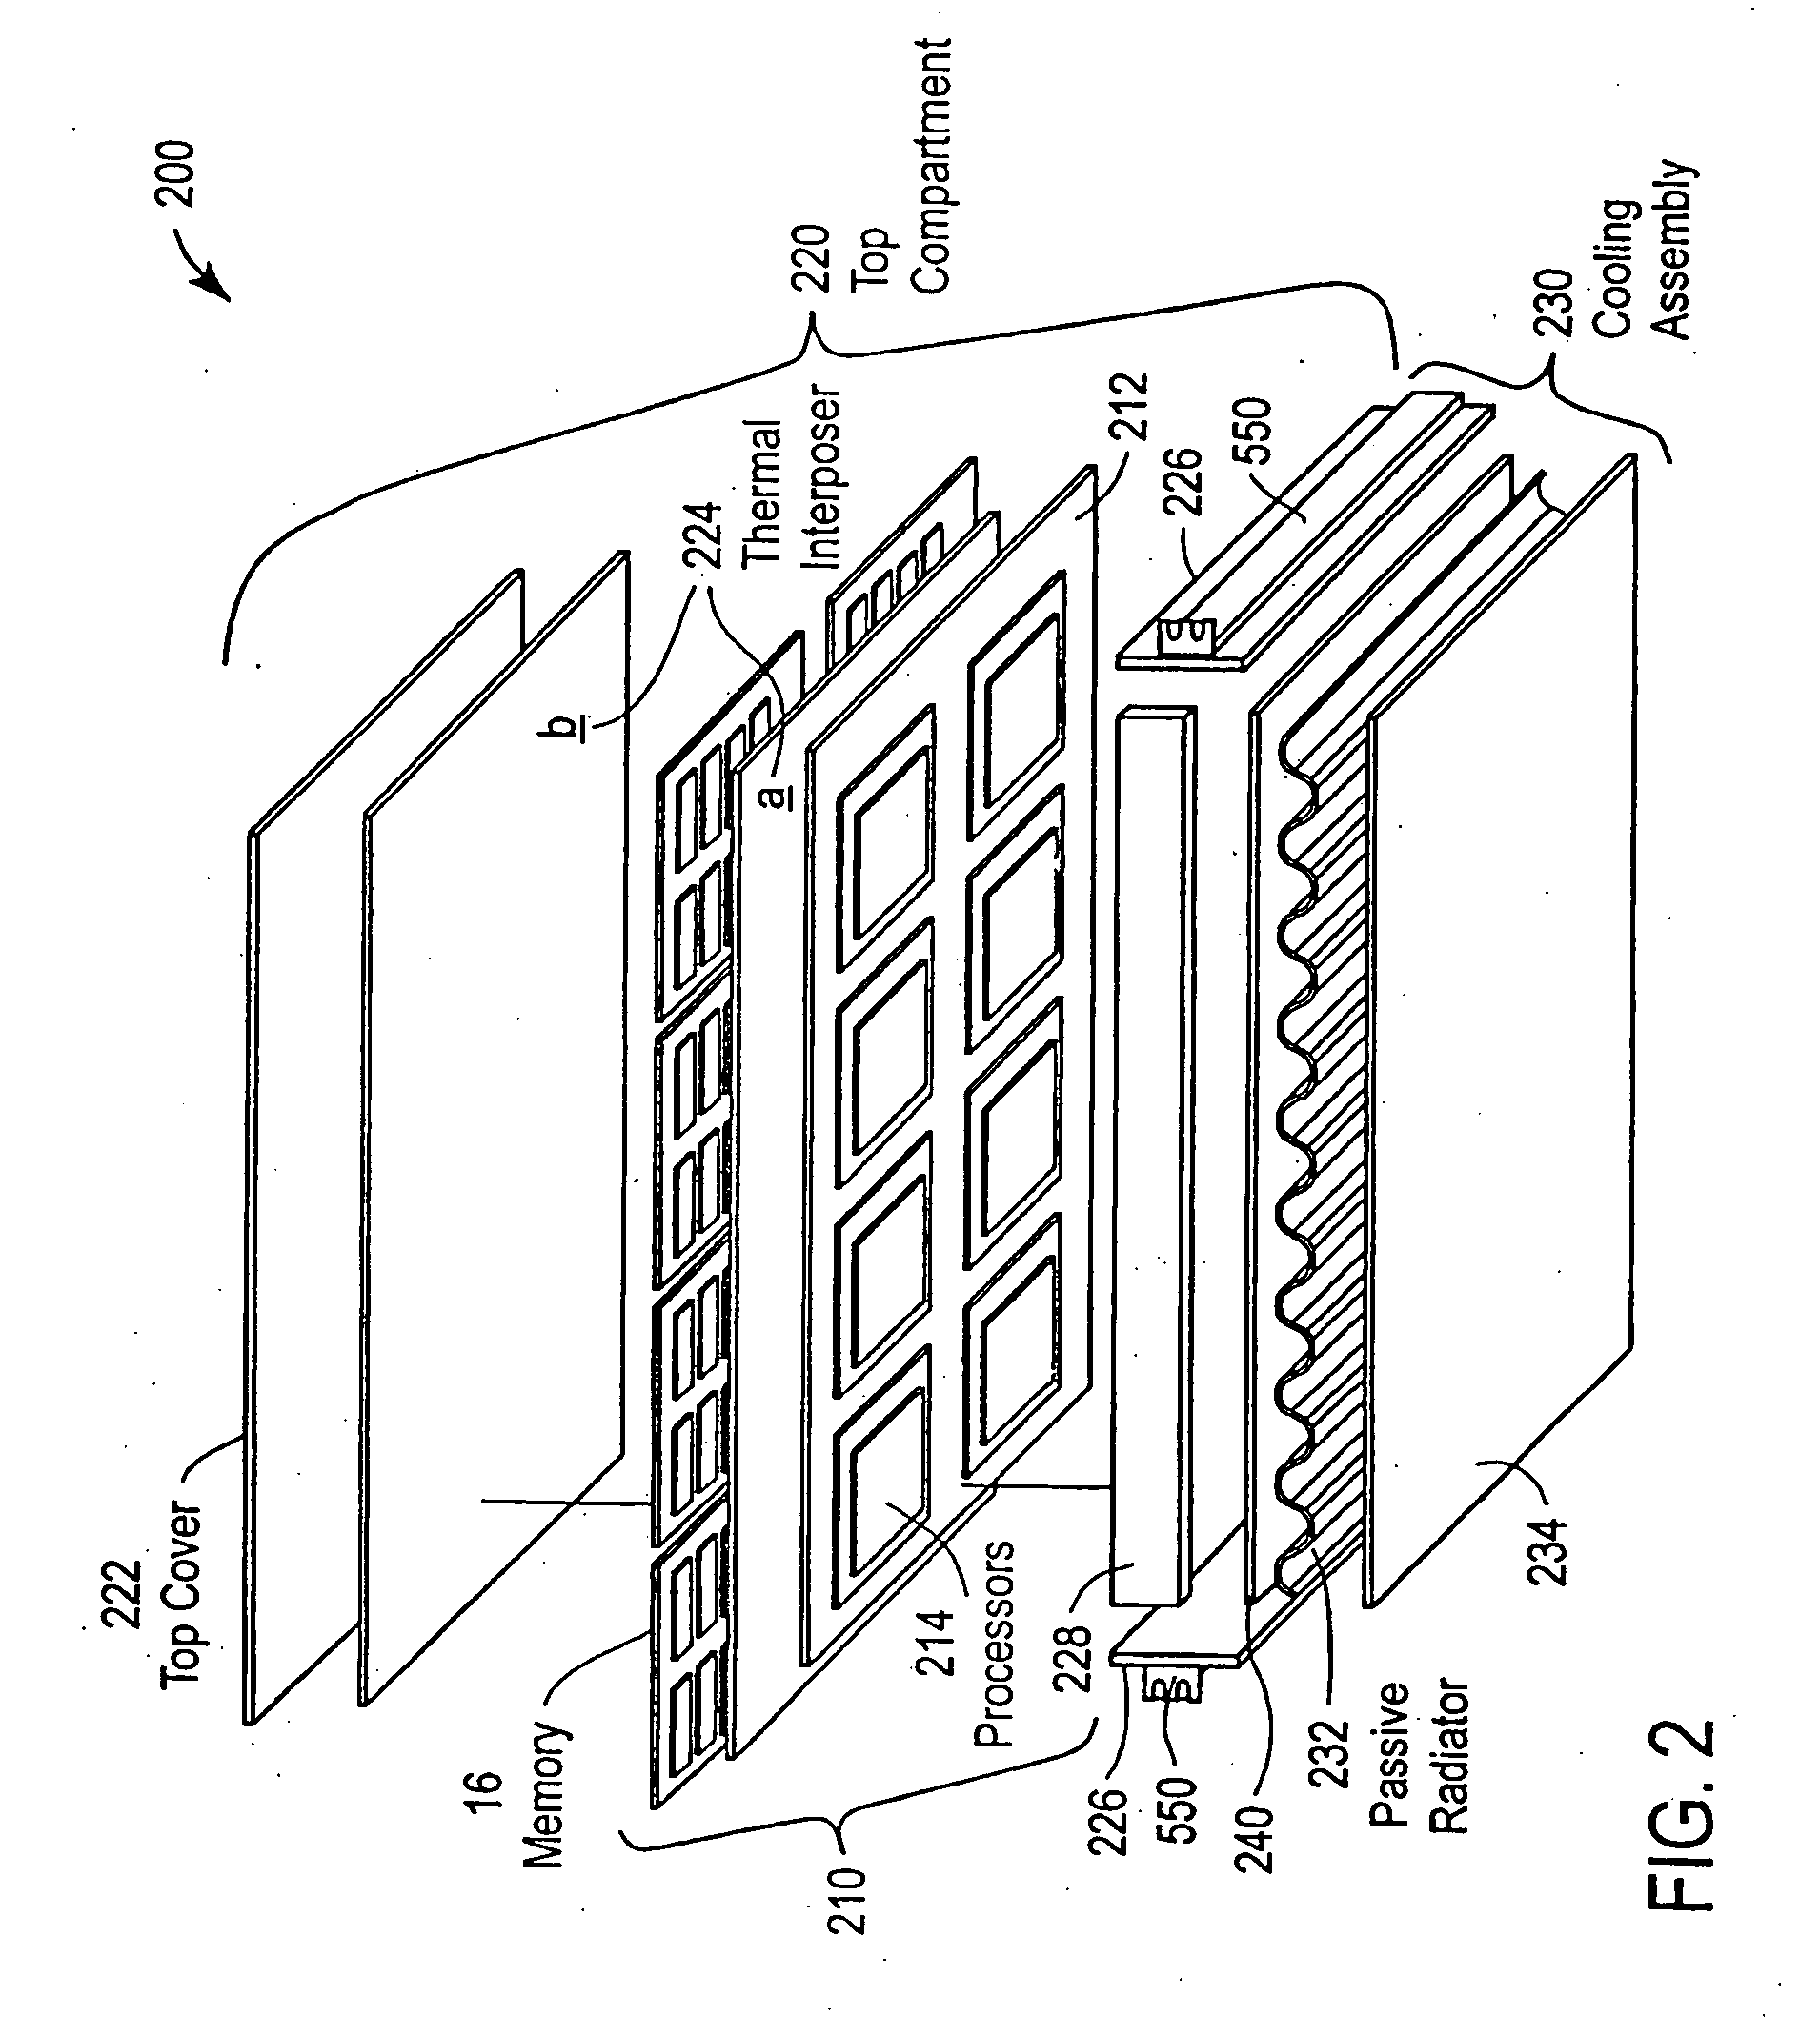 Thermal management for a ruggedized electronics enclosure